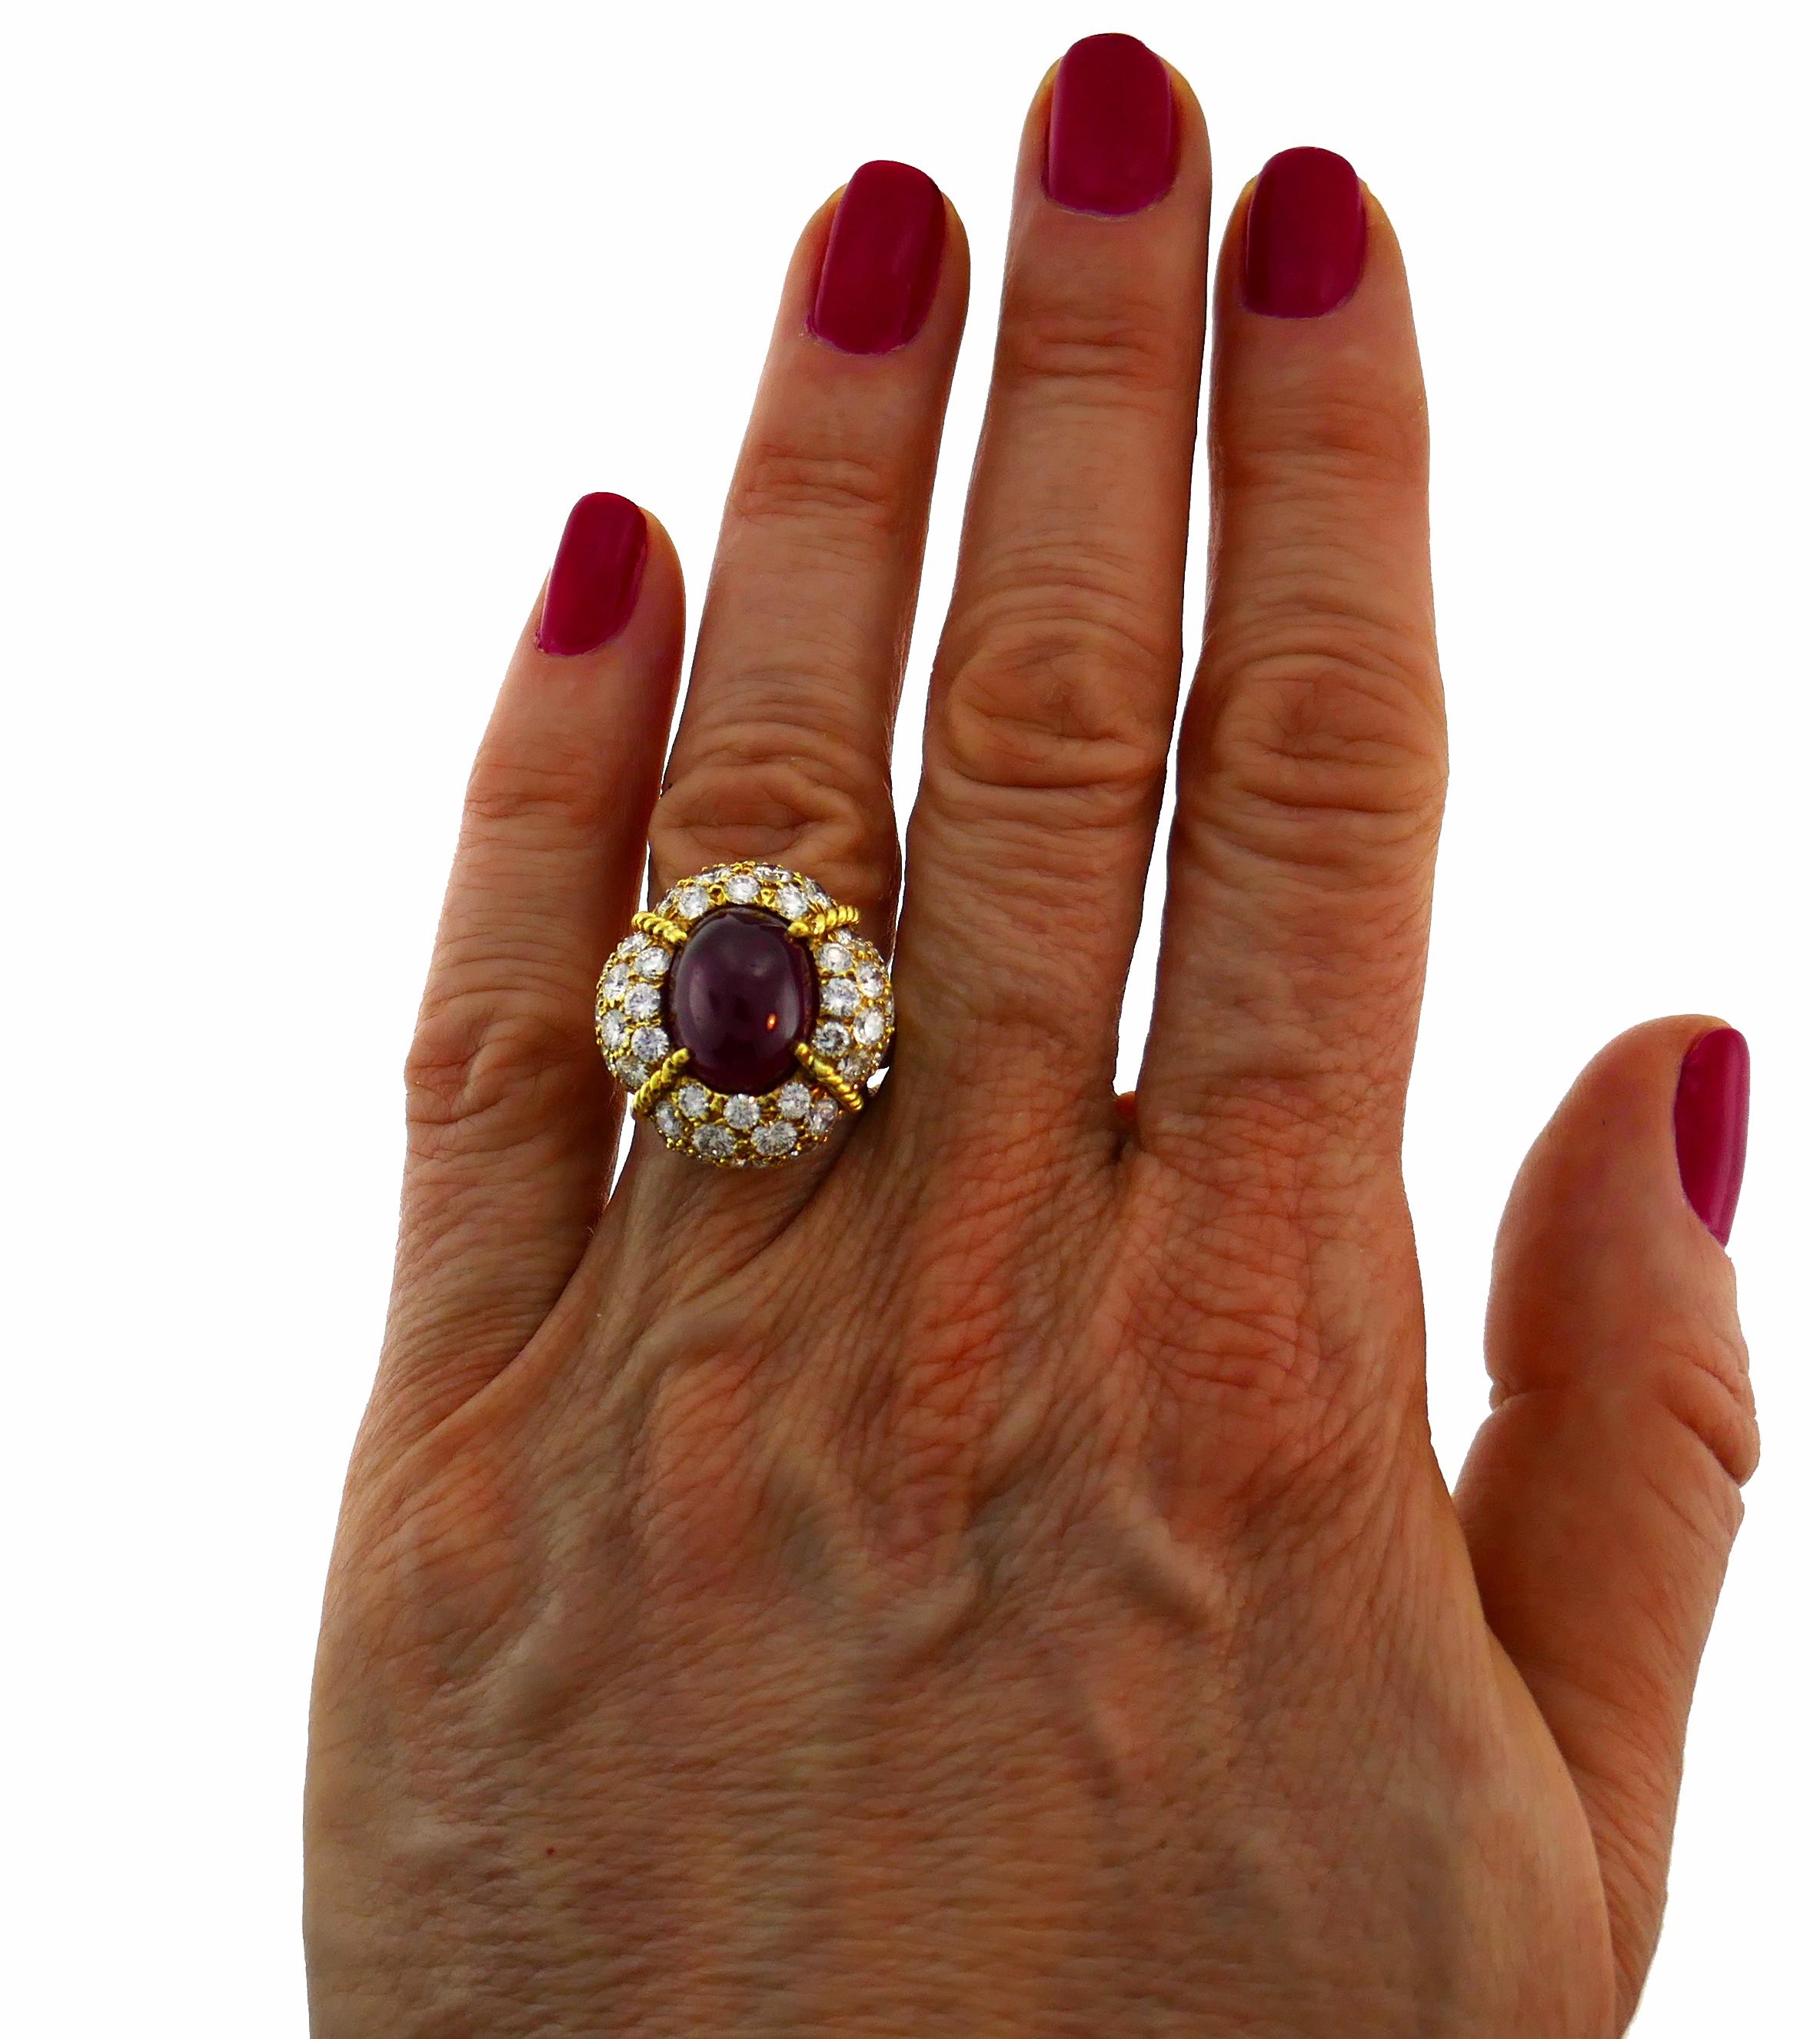 Stunning and chic cocktail ring created by Van Cleef & Arpels in France in 1985. Features an approximately 8.86-carat oval cabochon natural Burmese ruby set in yellow gold and framed with three rows of round brilliant cut diamonds (F-G color, VVS